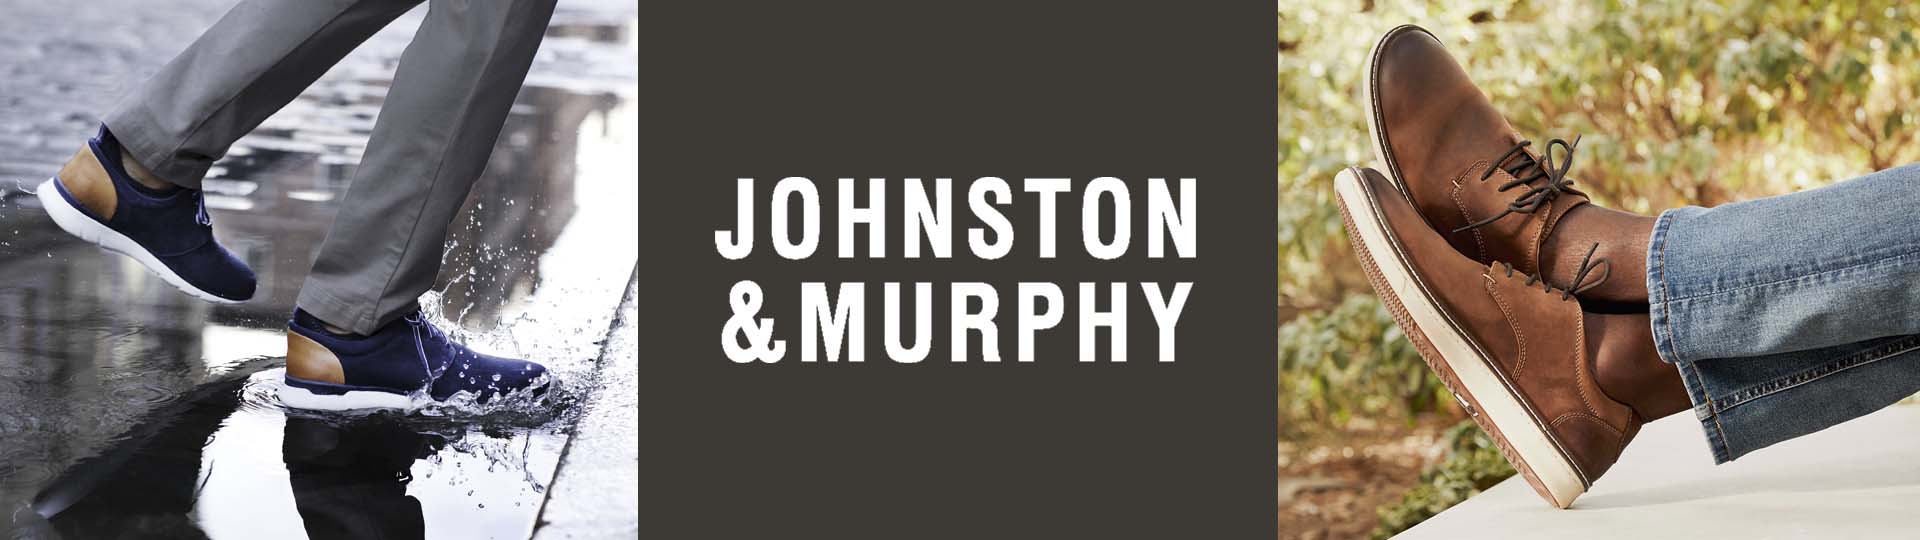 Johnston & Murphy - Wagners Shoes